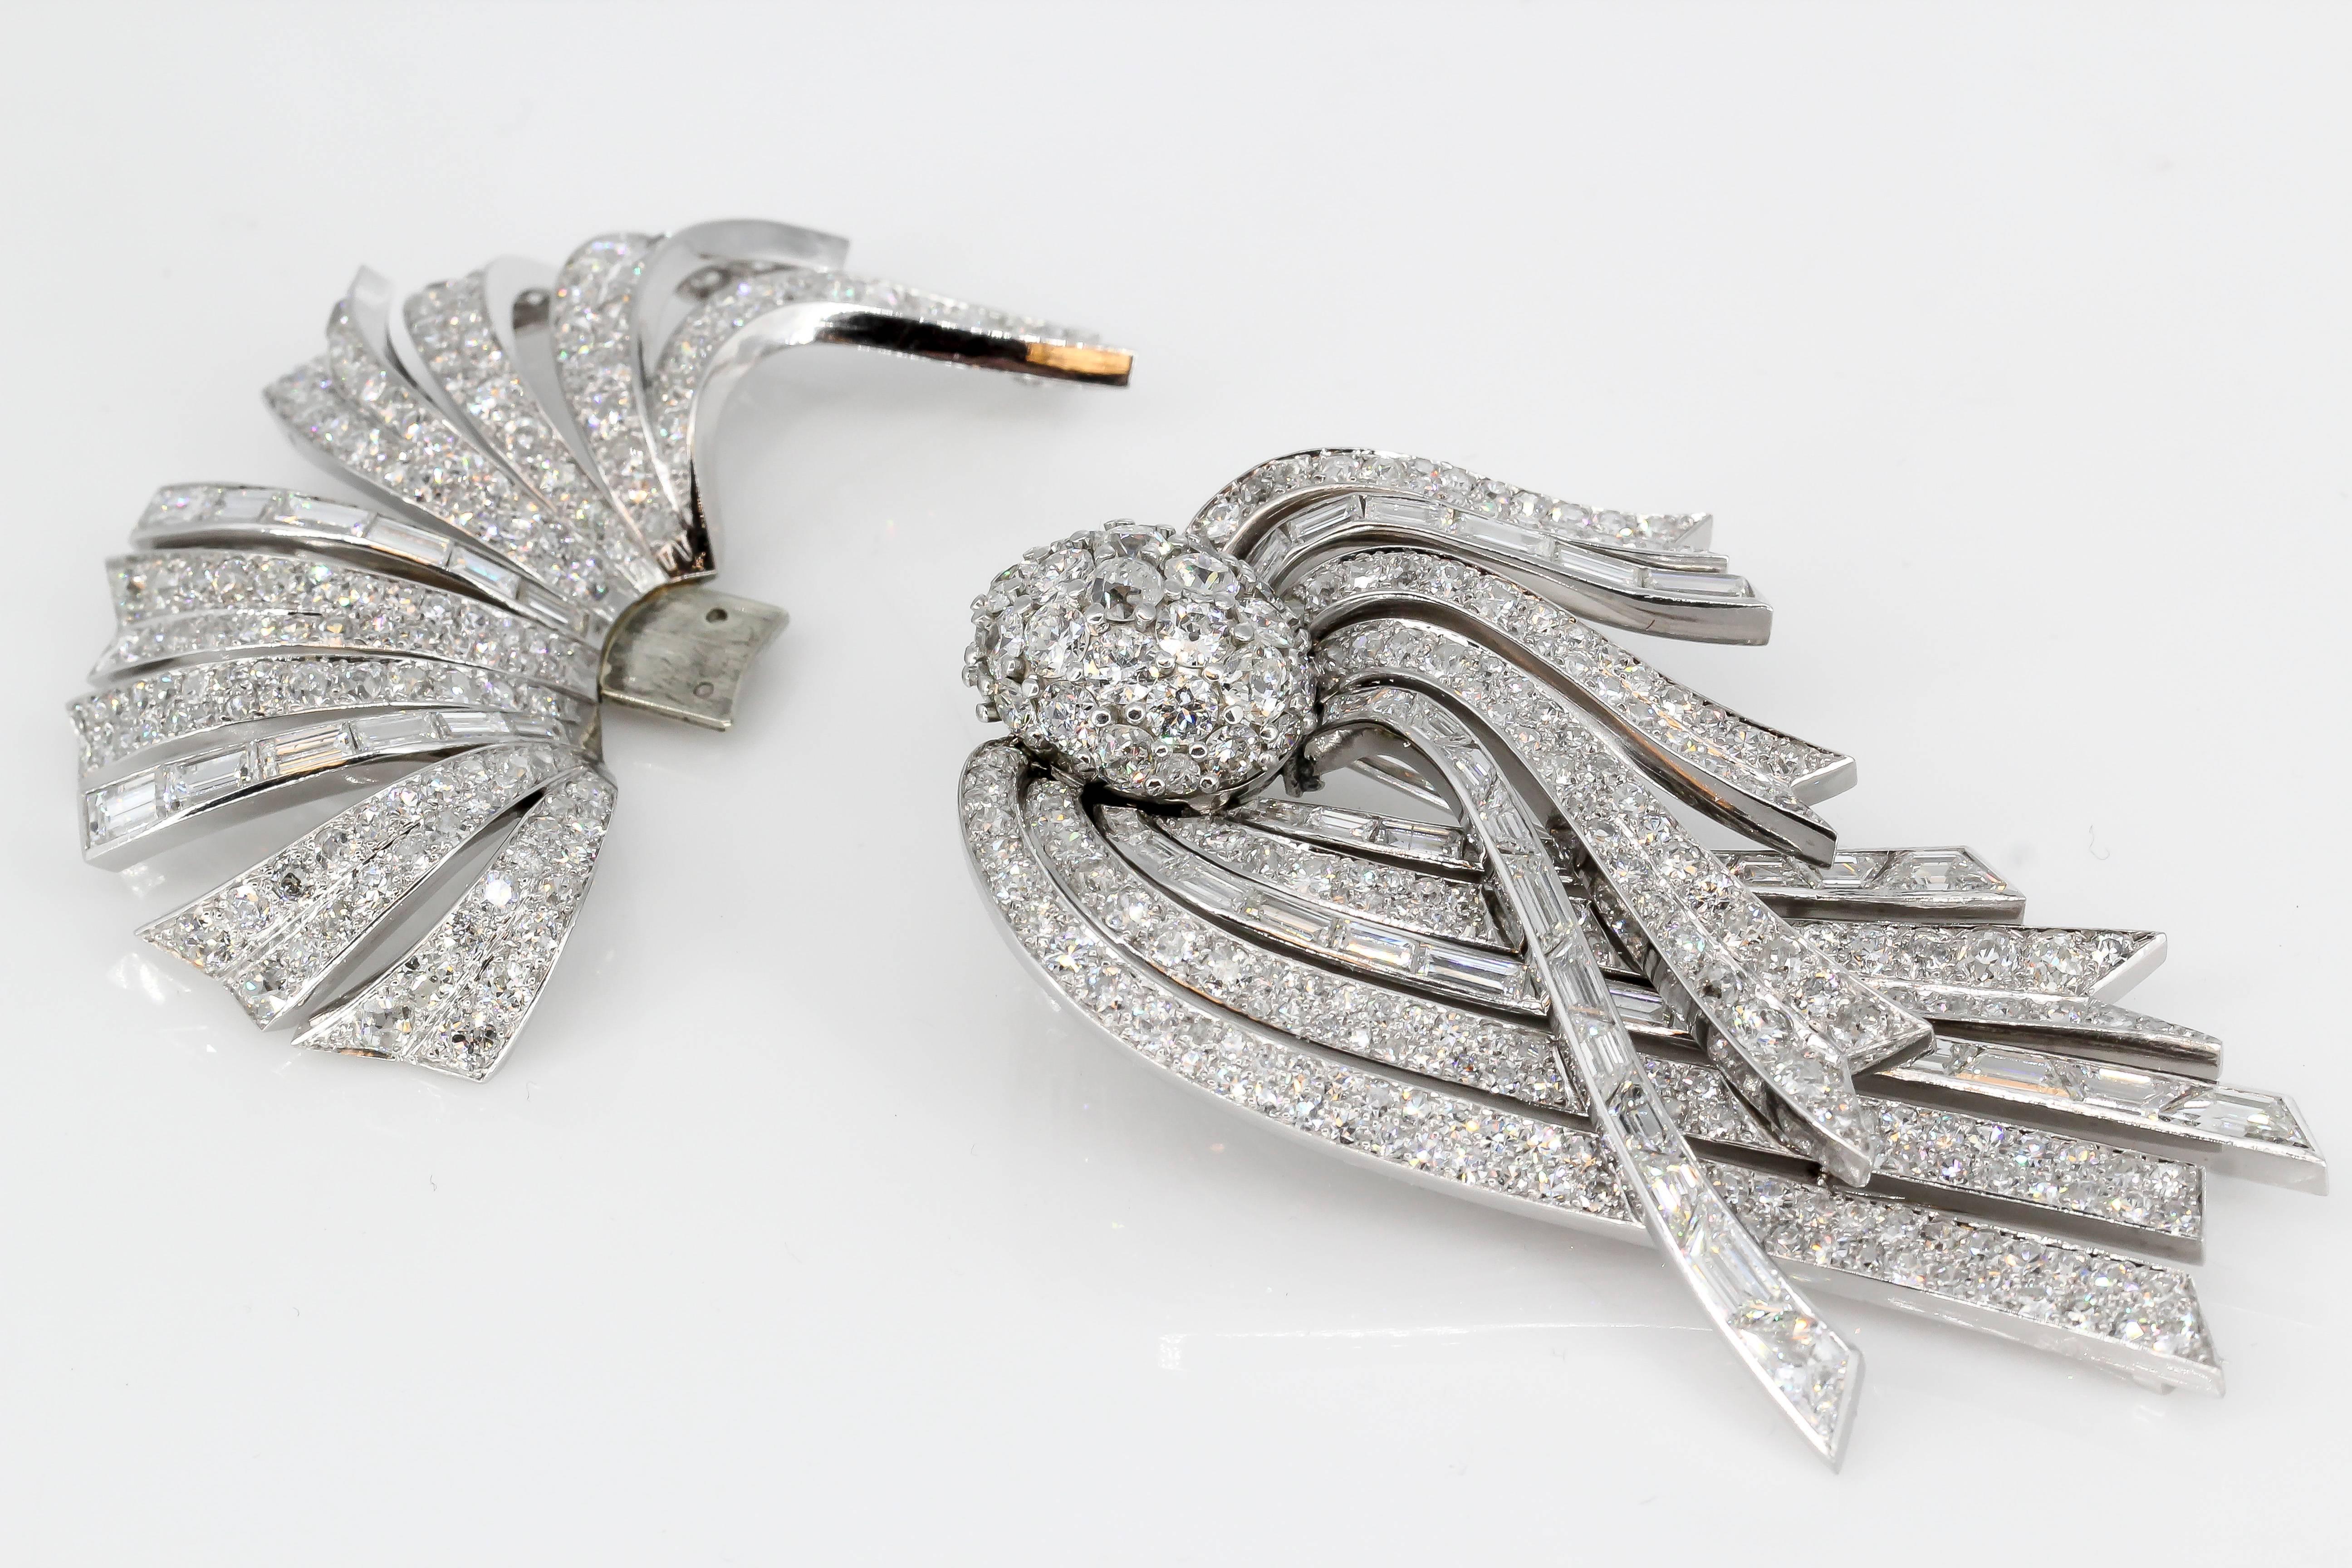 Impressive diamond, platinum and 18K white gold large traveling brooch by Lacloche Paris, circa 1920s. This is a one piece brooch that can be separated into two pieces for day or night wear, commonly referred to as "traveling jewelry".